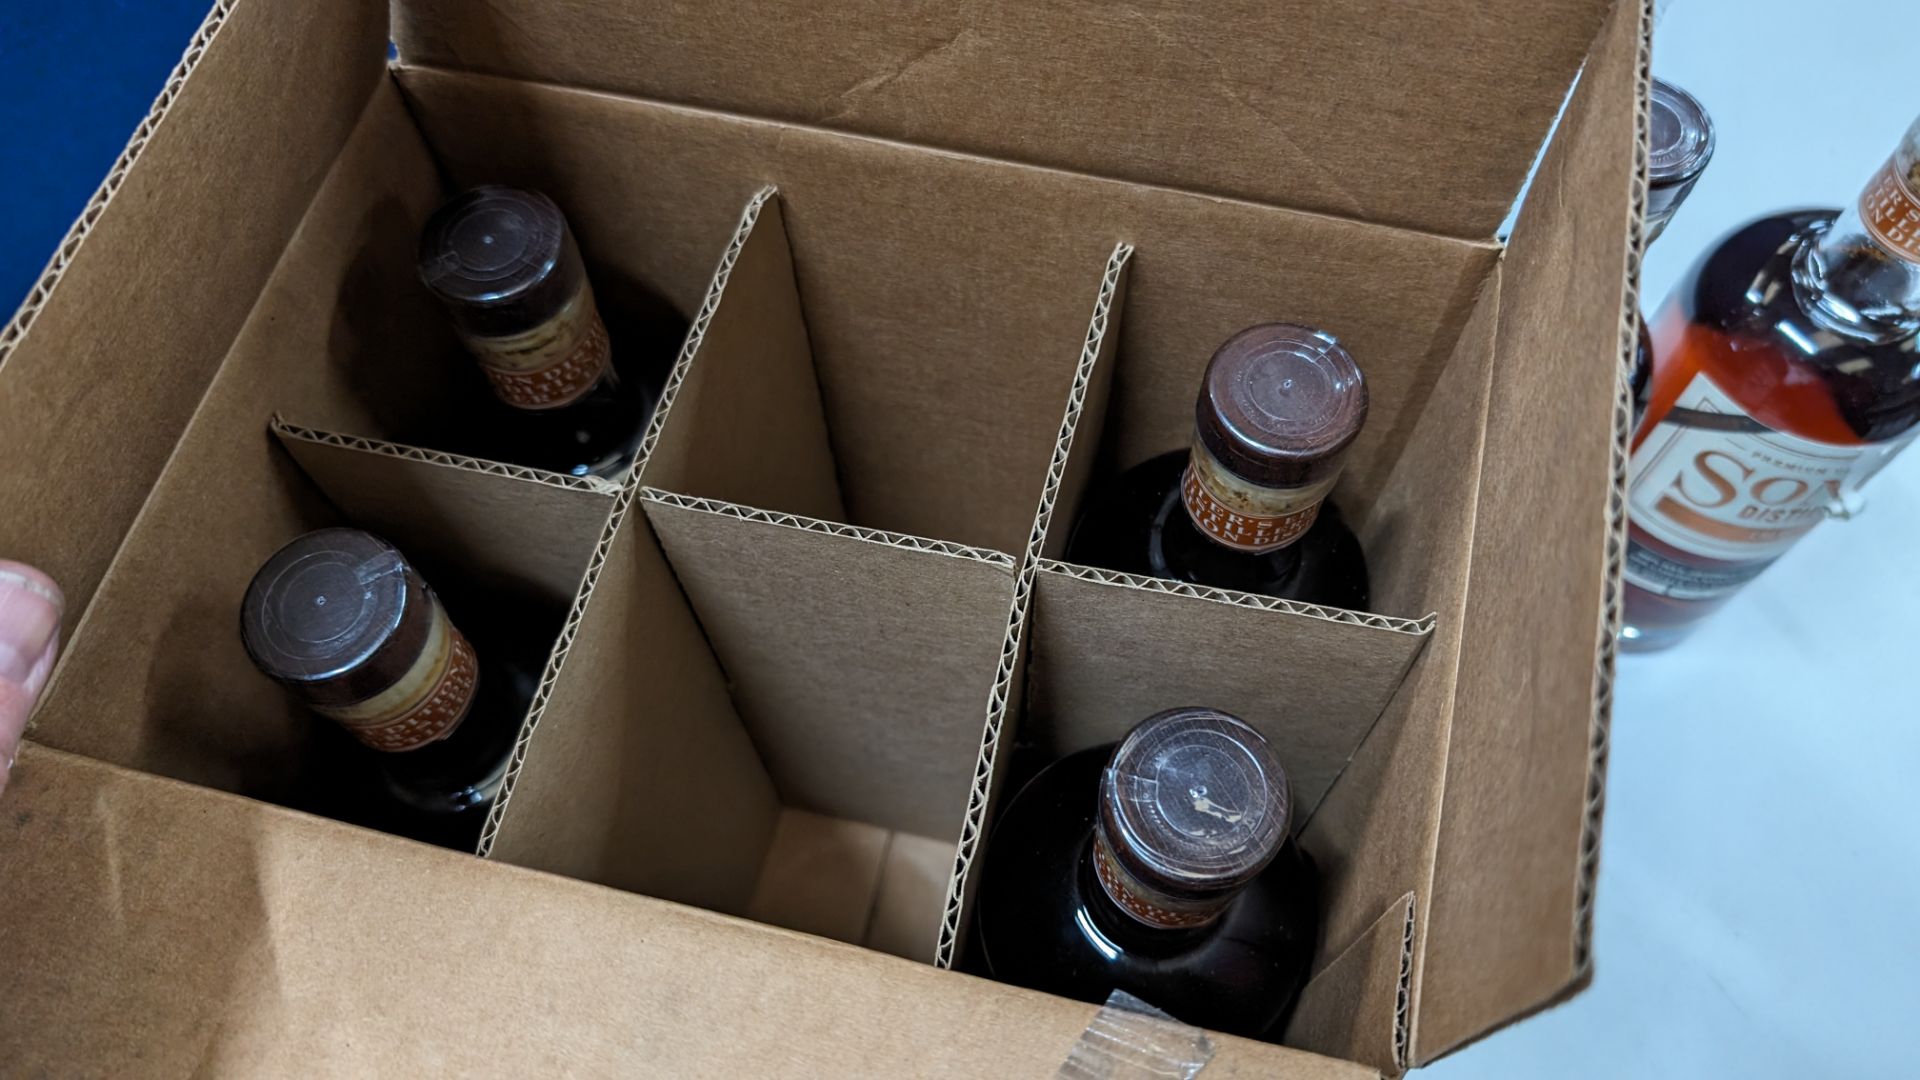 6 off 700ml bottles of Sonoma Cherrywood Rye Whiskey. In Sonoma branded box which includes bottling - Image 5 of 8